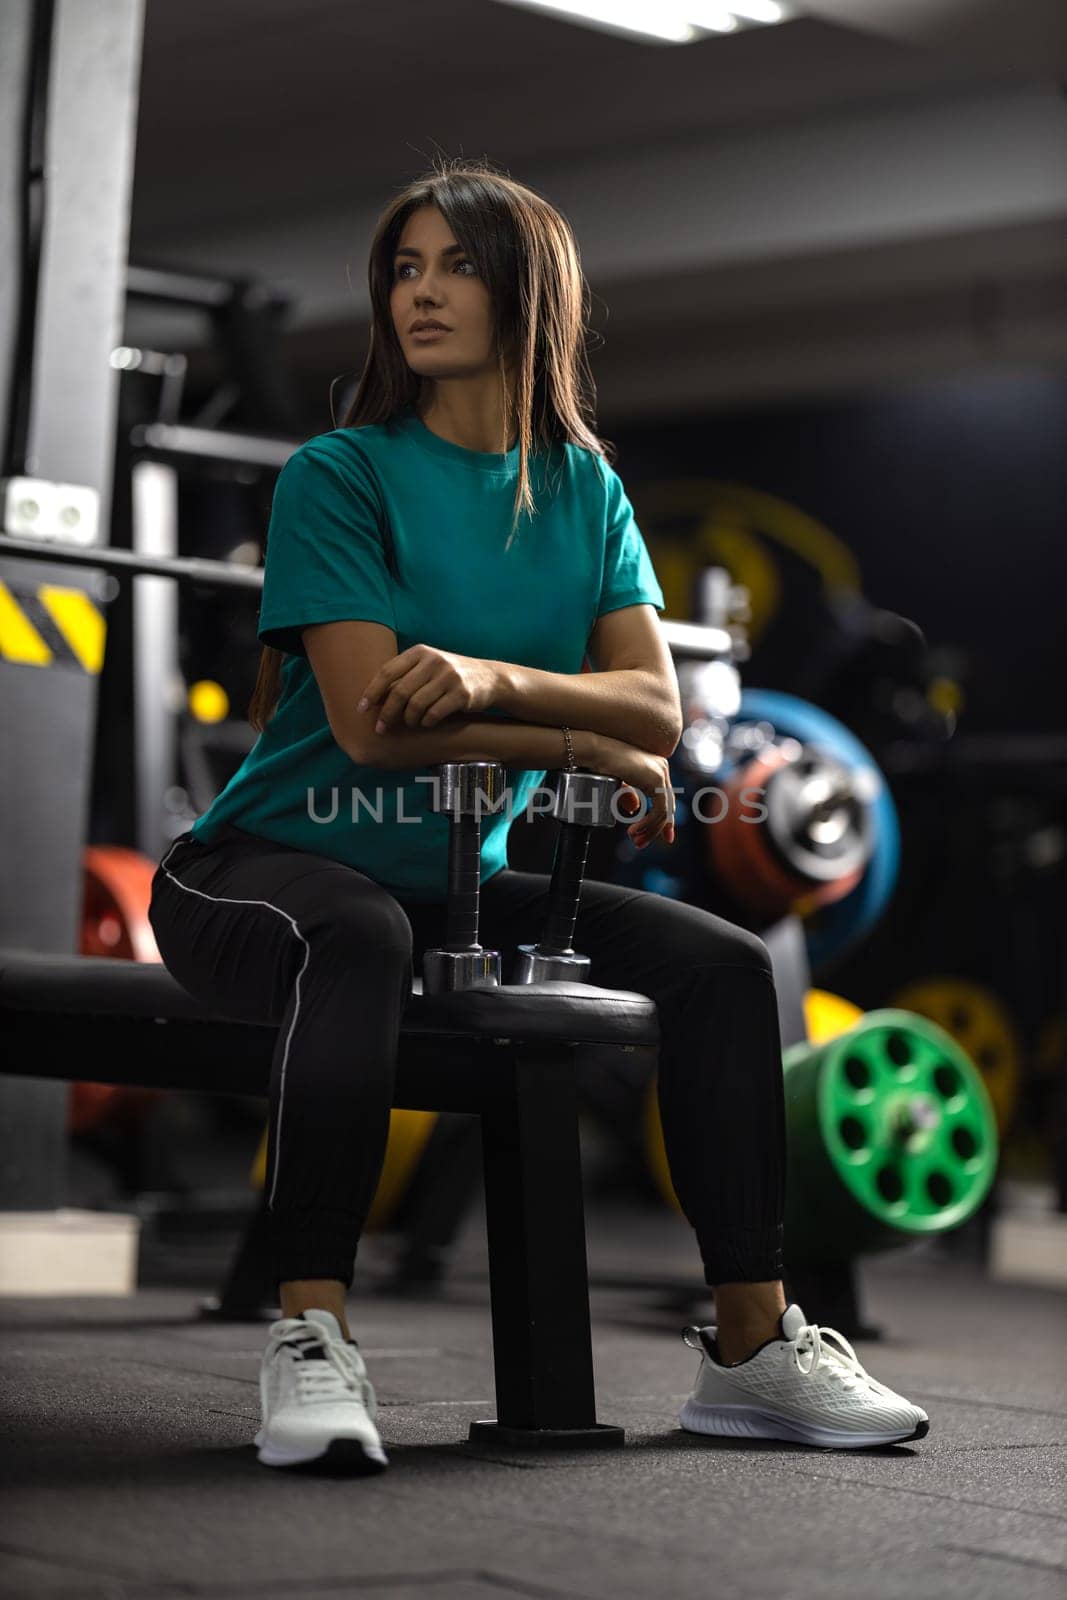 Attractive brunette athletic girl in green T-shirt and black sweatpants leans against bench press bar in the gym. Healthy lifestyle, sexy female body and sports fashion